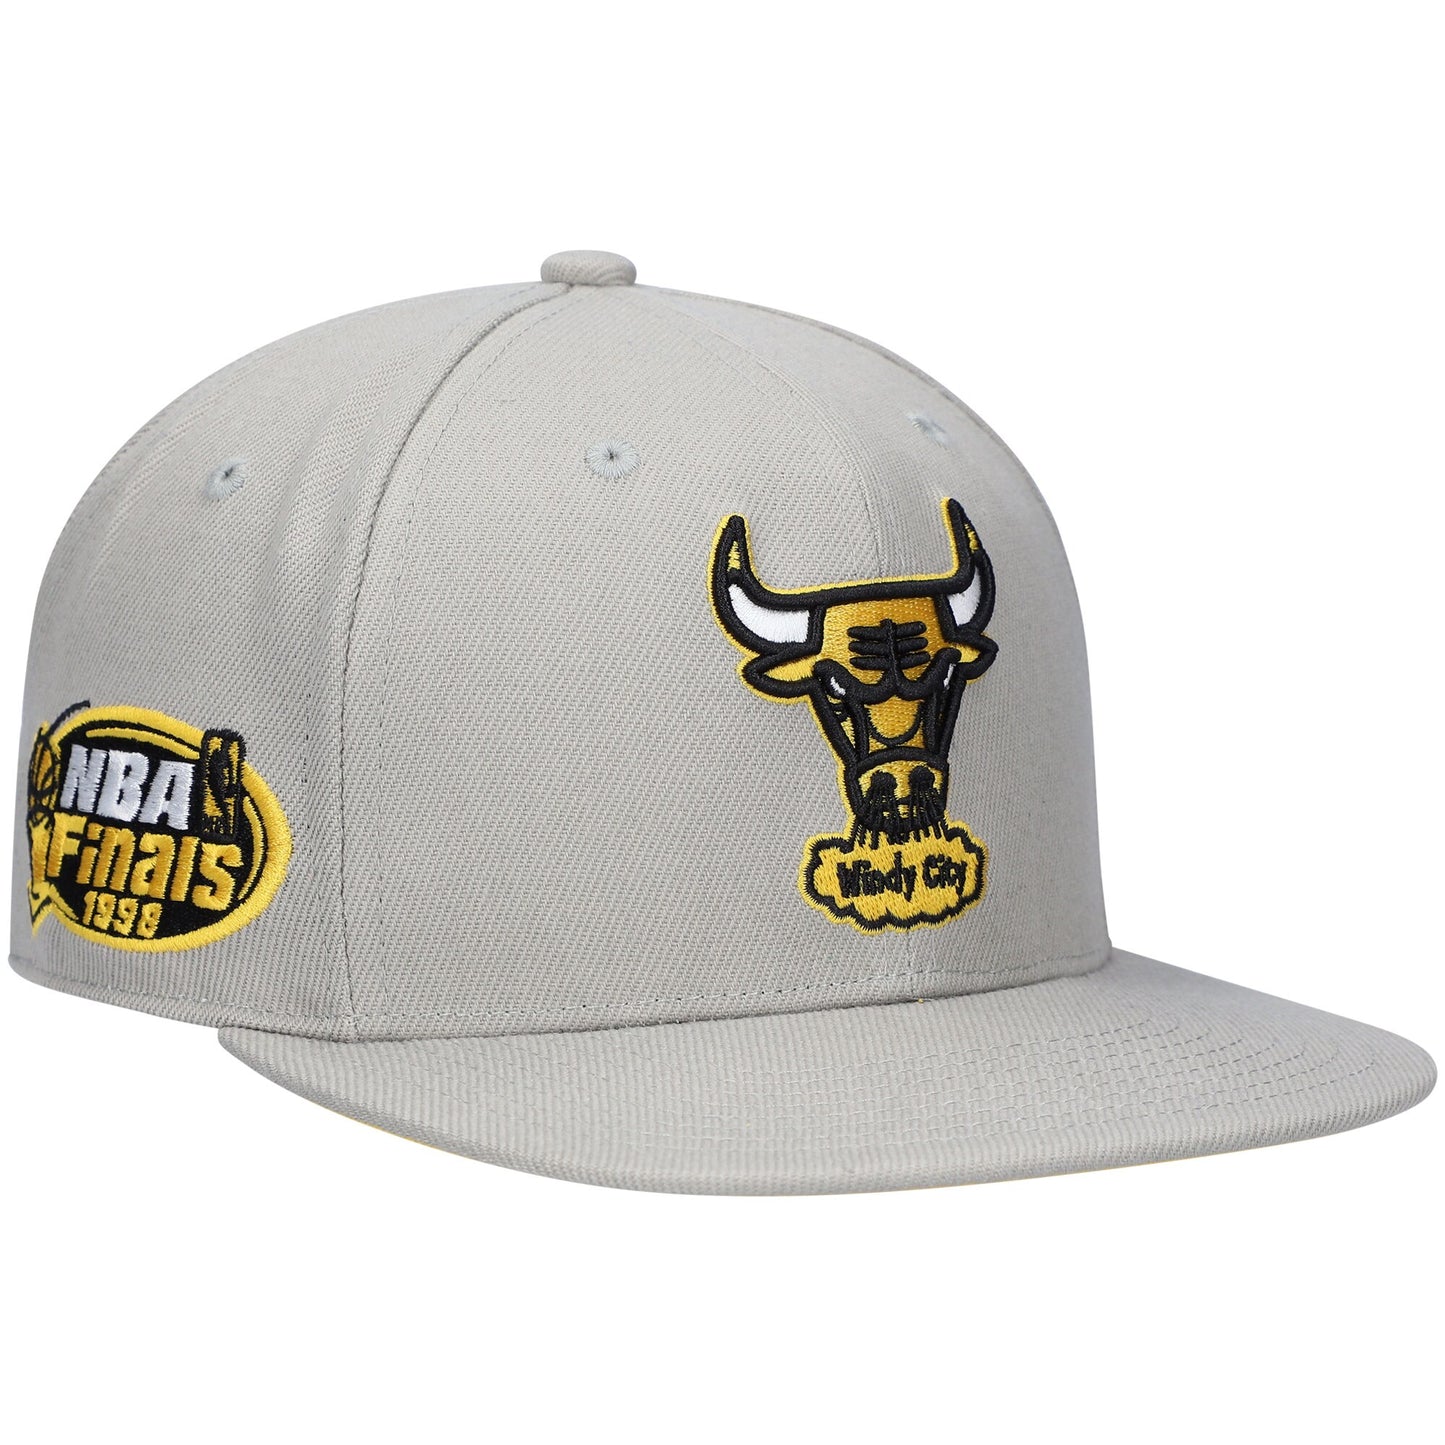 Chicago Bulls Mitchell & Ness Hardwood Classics 1998 NBA Finals Sunny Gray Fitted Hat - Gray